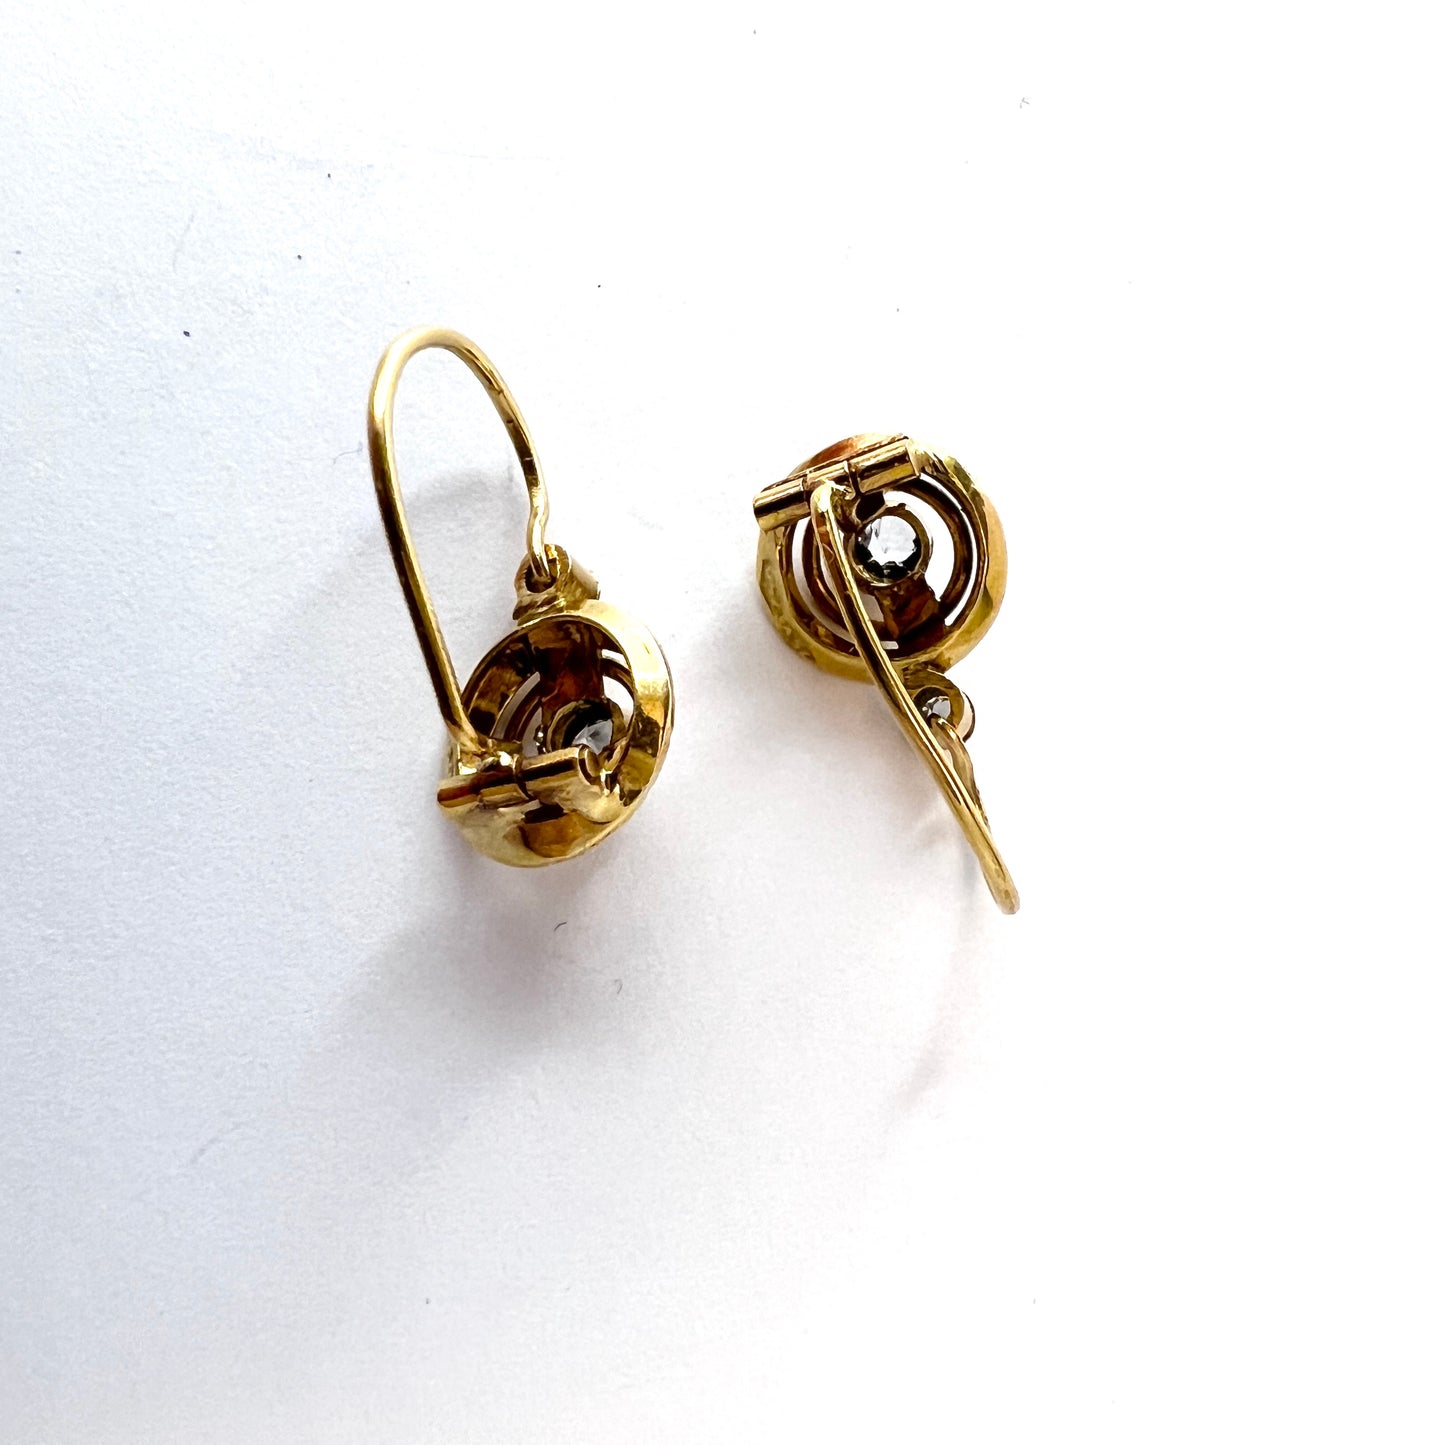 Stefani Amedeo, Vicenza Italy c 1950. 18k Gold Paste Earrings.